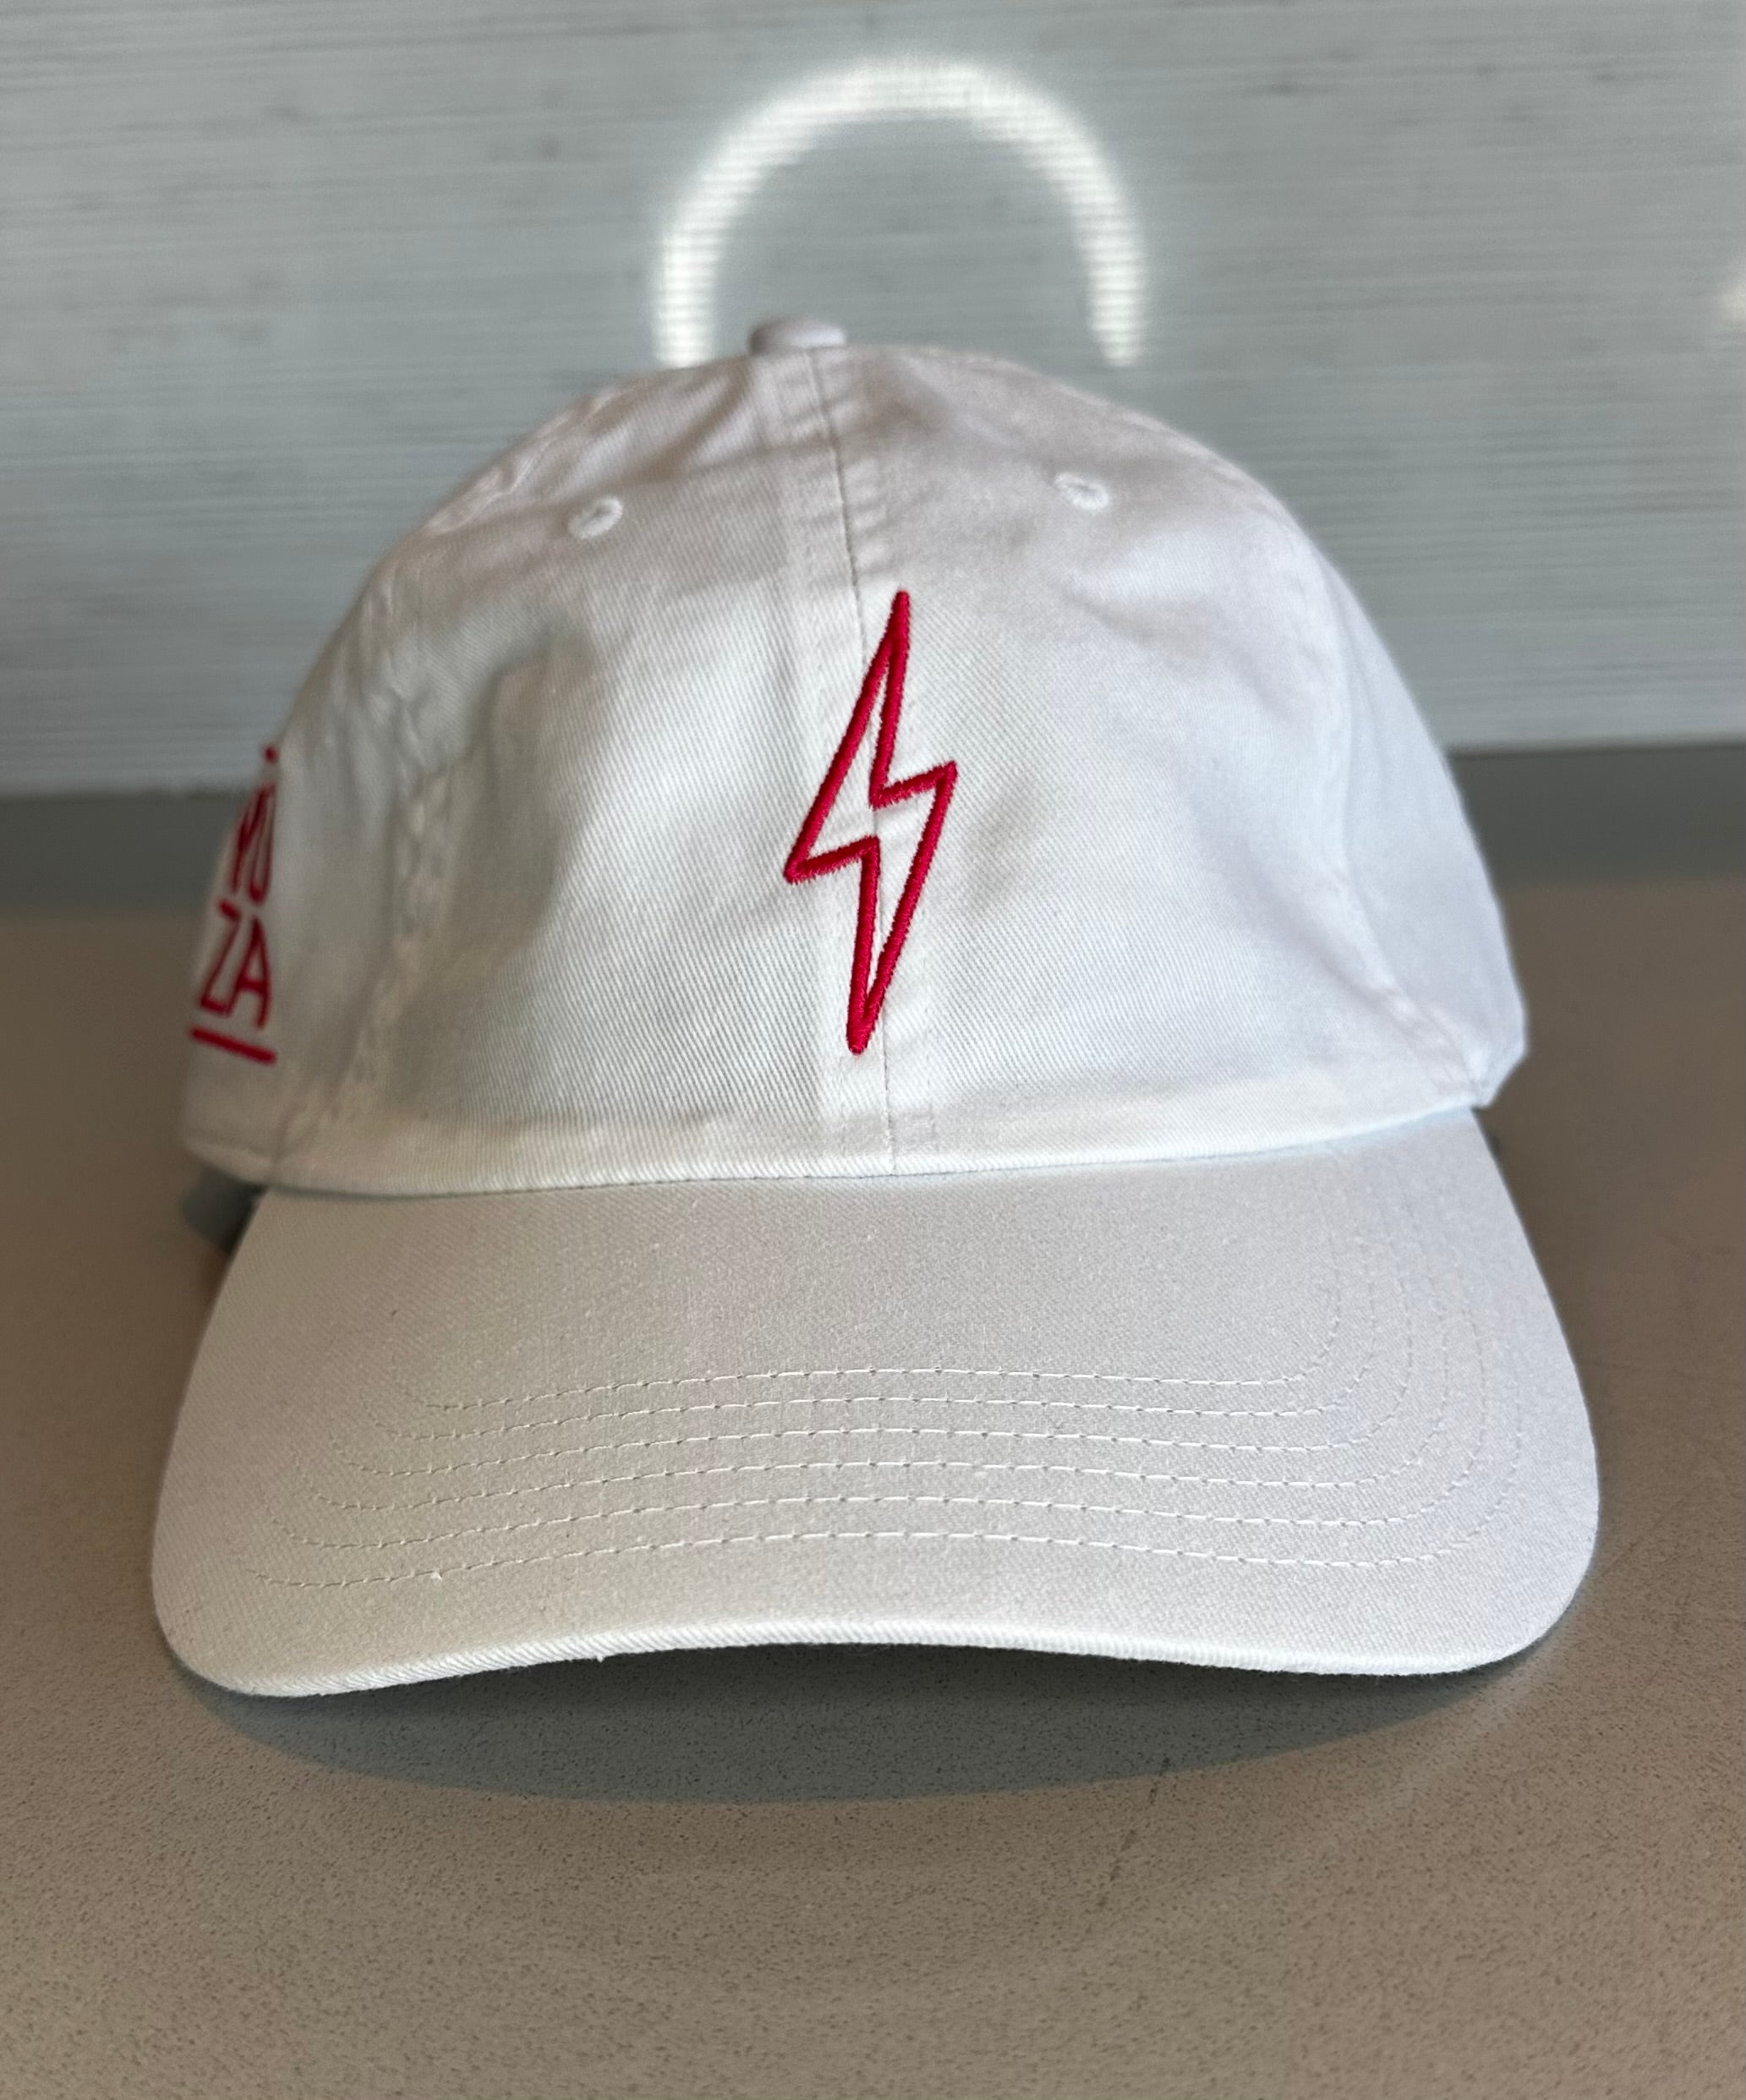 YUZA Dad Hat **4 YUZA SUPERSTICKS INCLUDED**